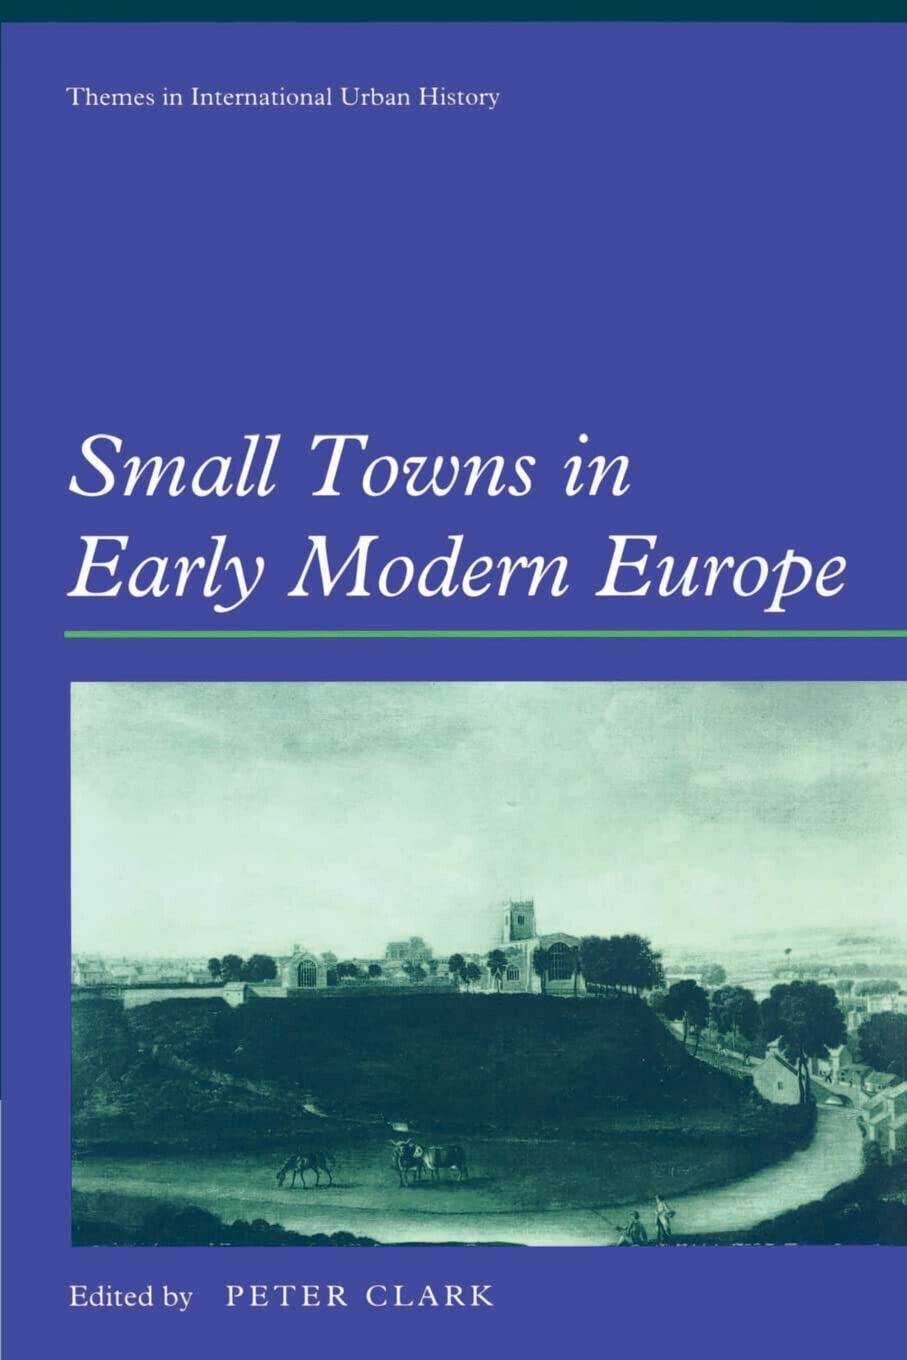 Small Towns in Early Modern Europe - Peter Clark - cambridge, 2010